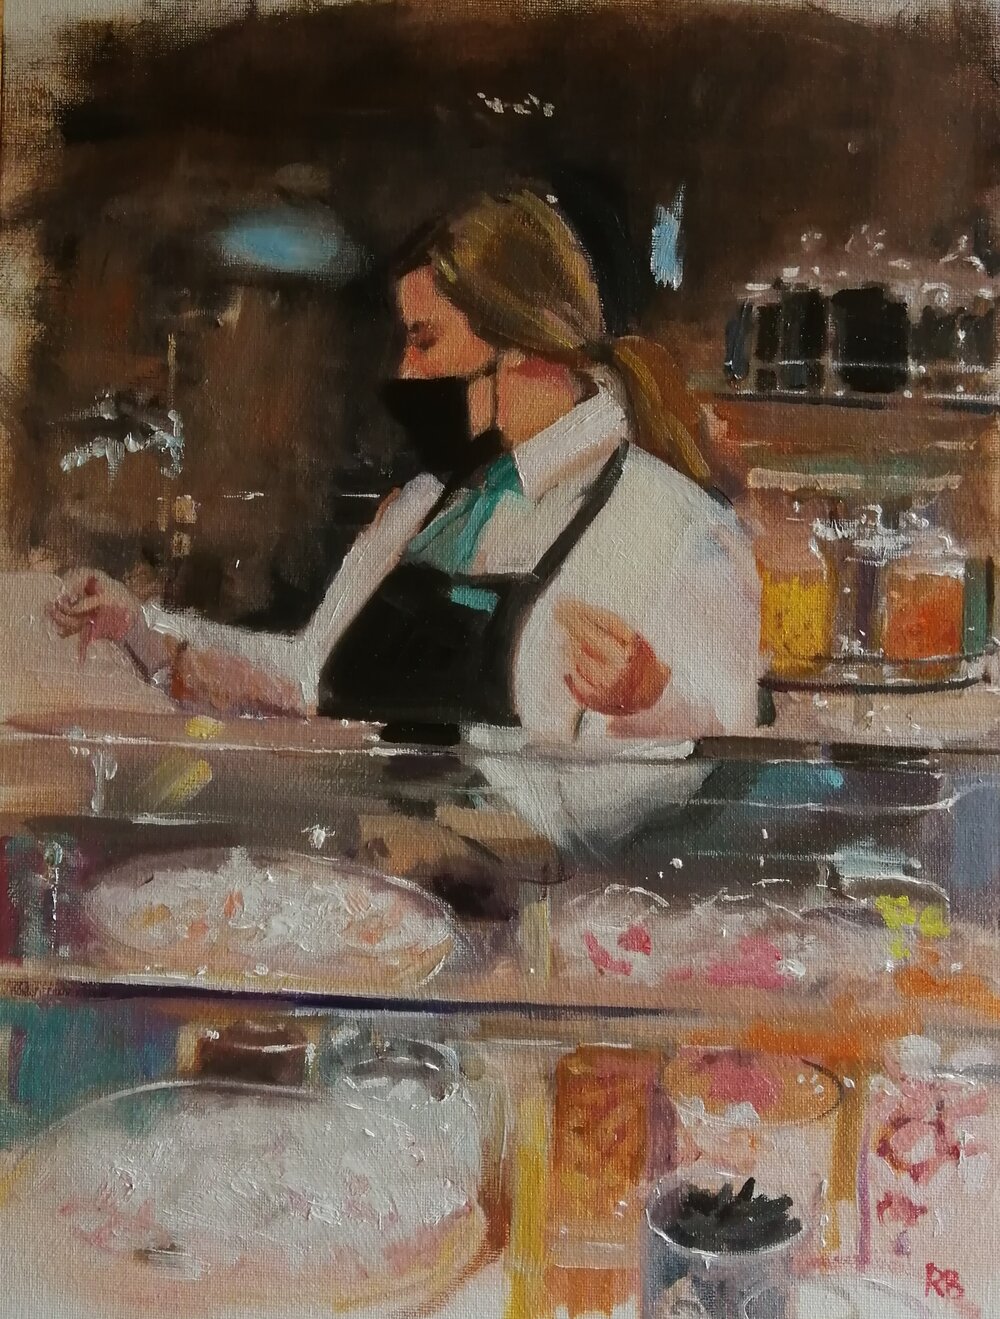  Turkish delight  2021  Oil on board  31x41 cm  £400  An energetic portrayal of a girl serving turkish delight and other sweets in the famous London shop, Fortnum and Mason. The glistening glass, lights, and powdery sweets add glamour to this impress